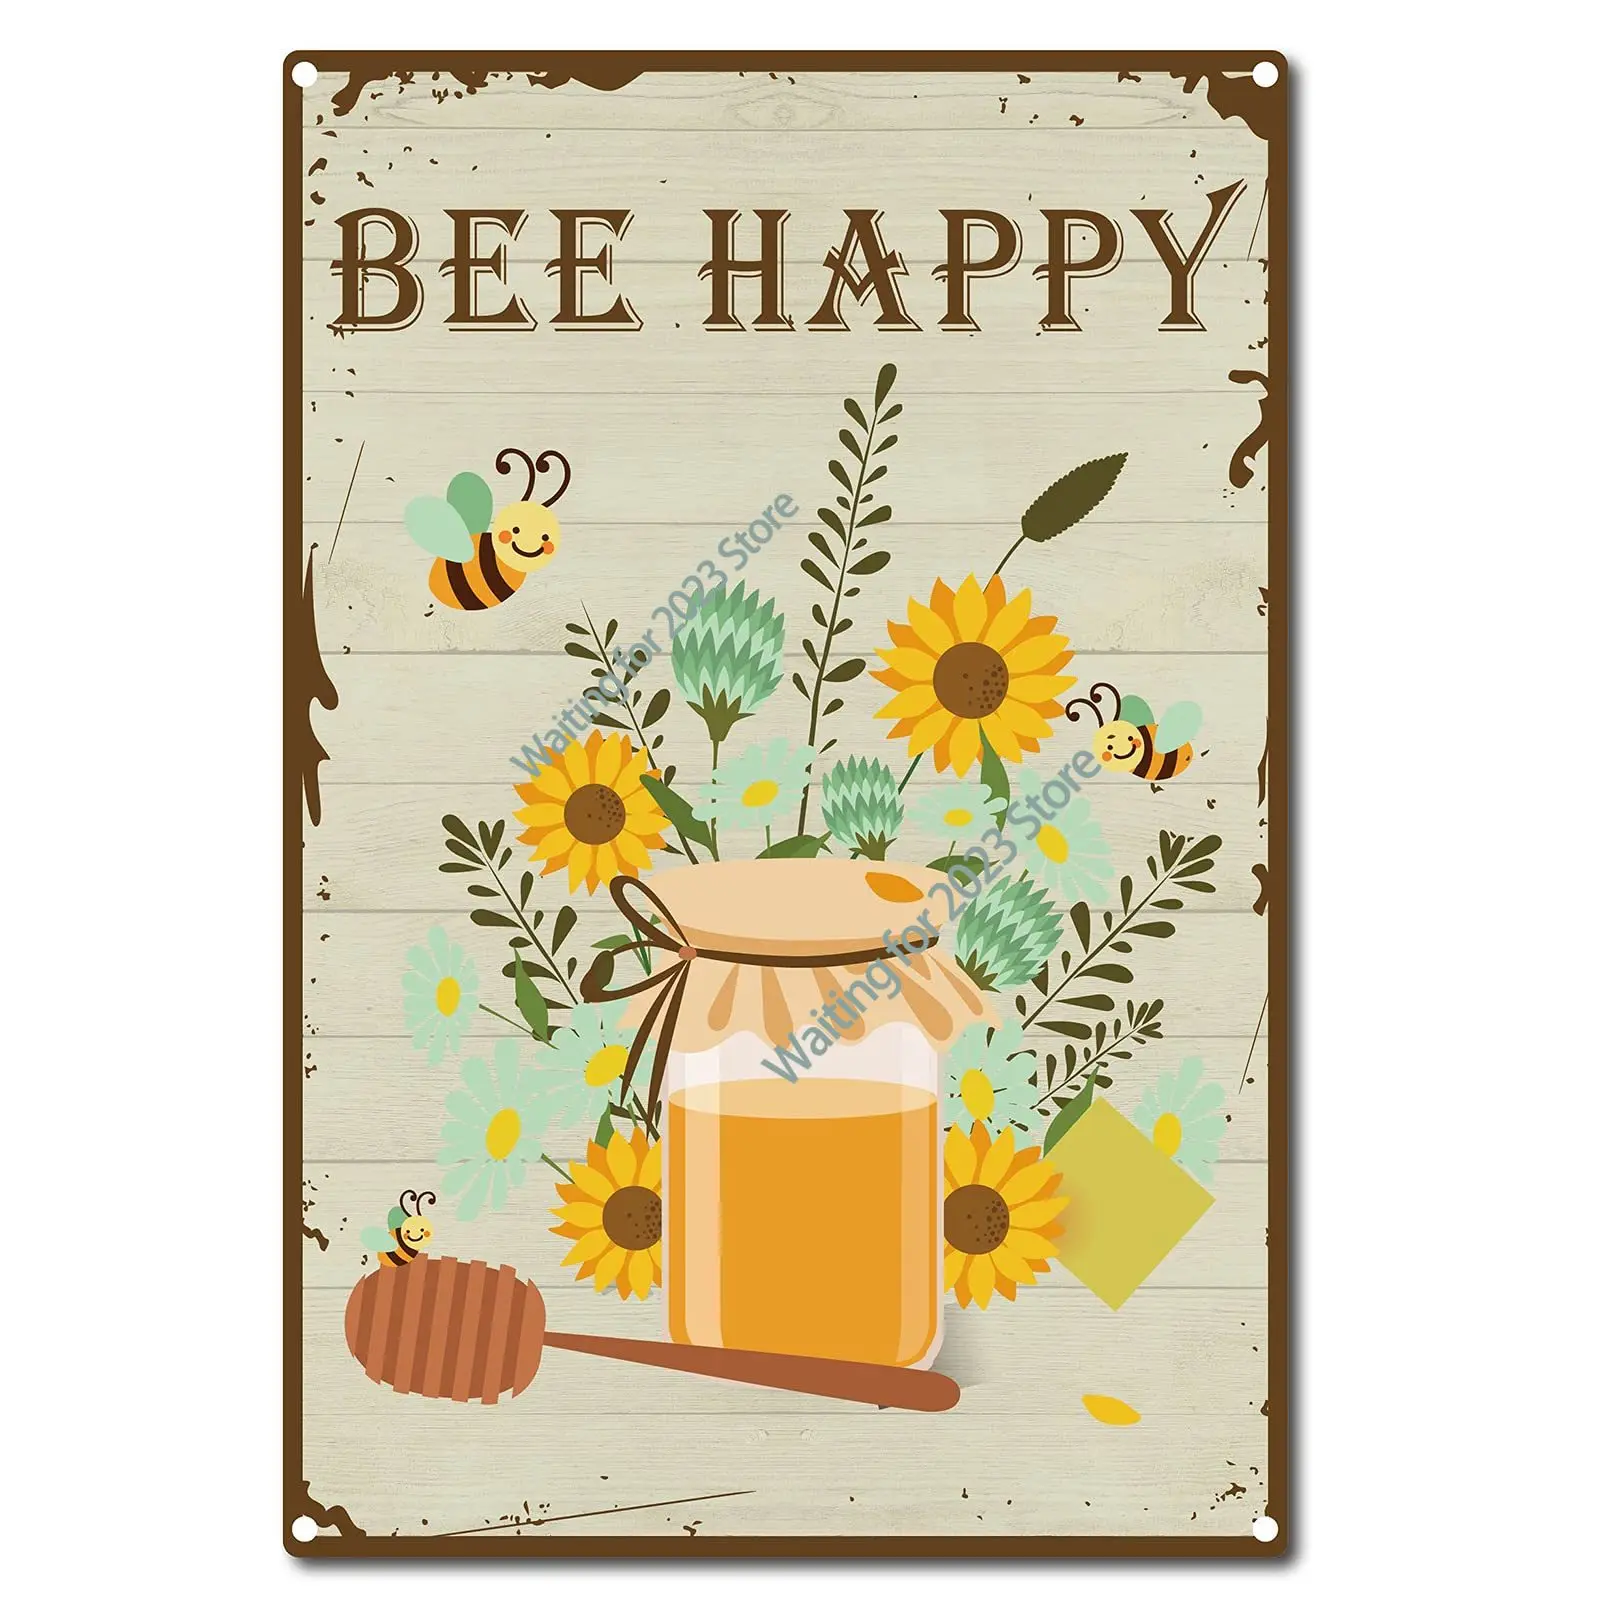 

Tin Sign Bee Happy Sunflower Retro Vintage Metal Wall Decoration Art Mural for Home Garden Kitchen Bar Pub Living Room Office